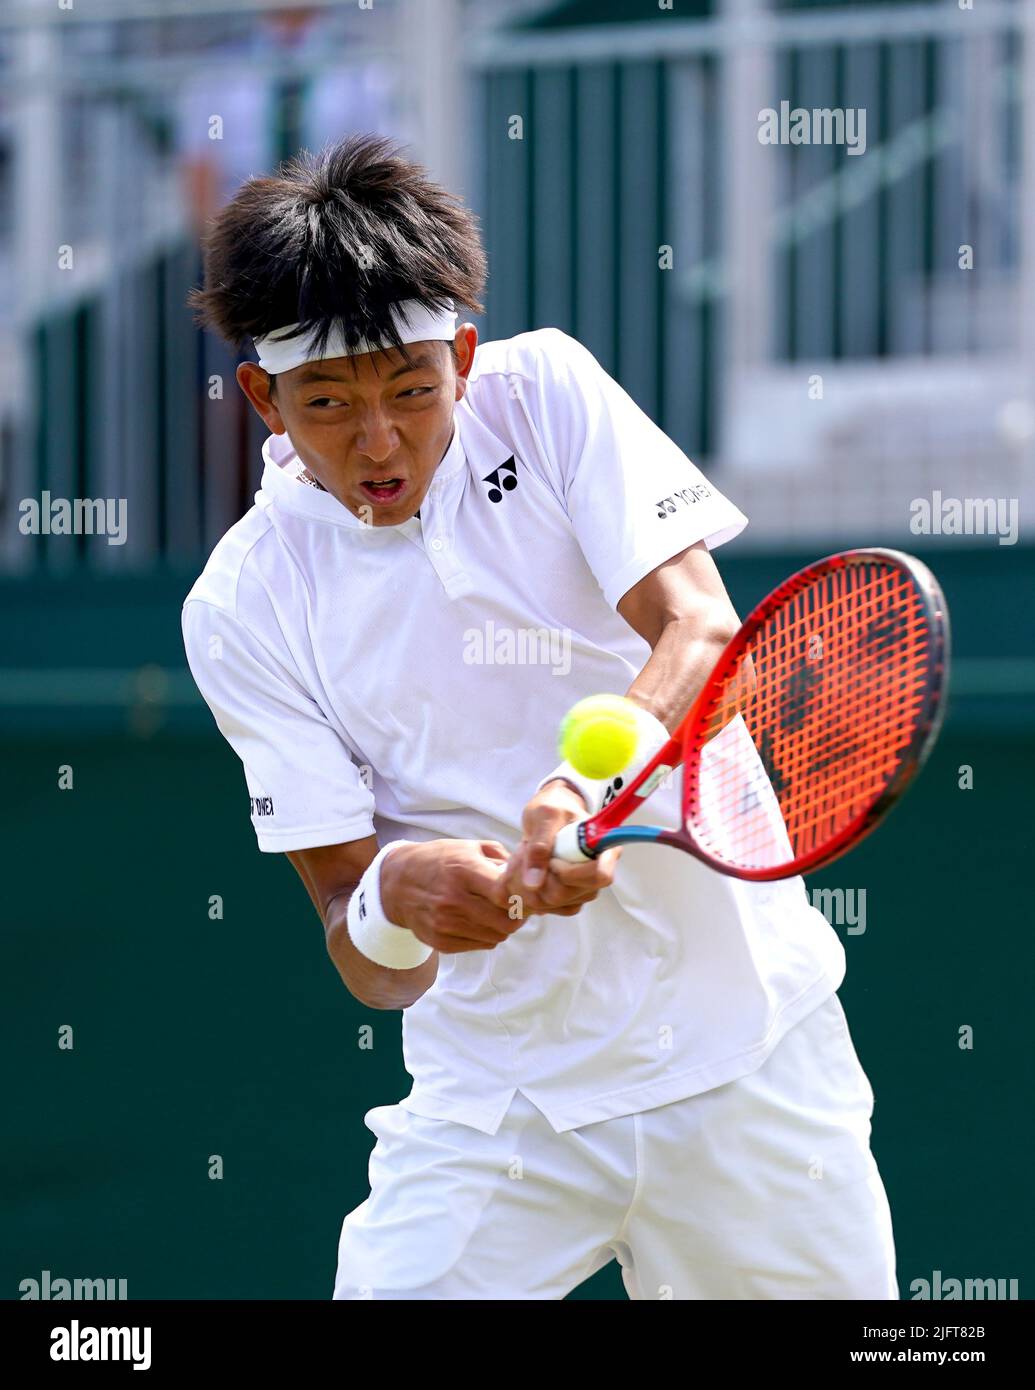 Aidan Kim in action during his Boys Singles second round match against Gabriel Debru on court 12 on day nine of the 2022 Wimbledon Championships at the All England Lawn Tennis and